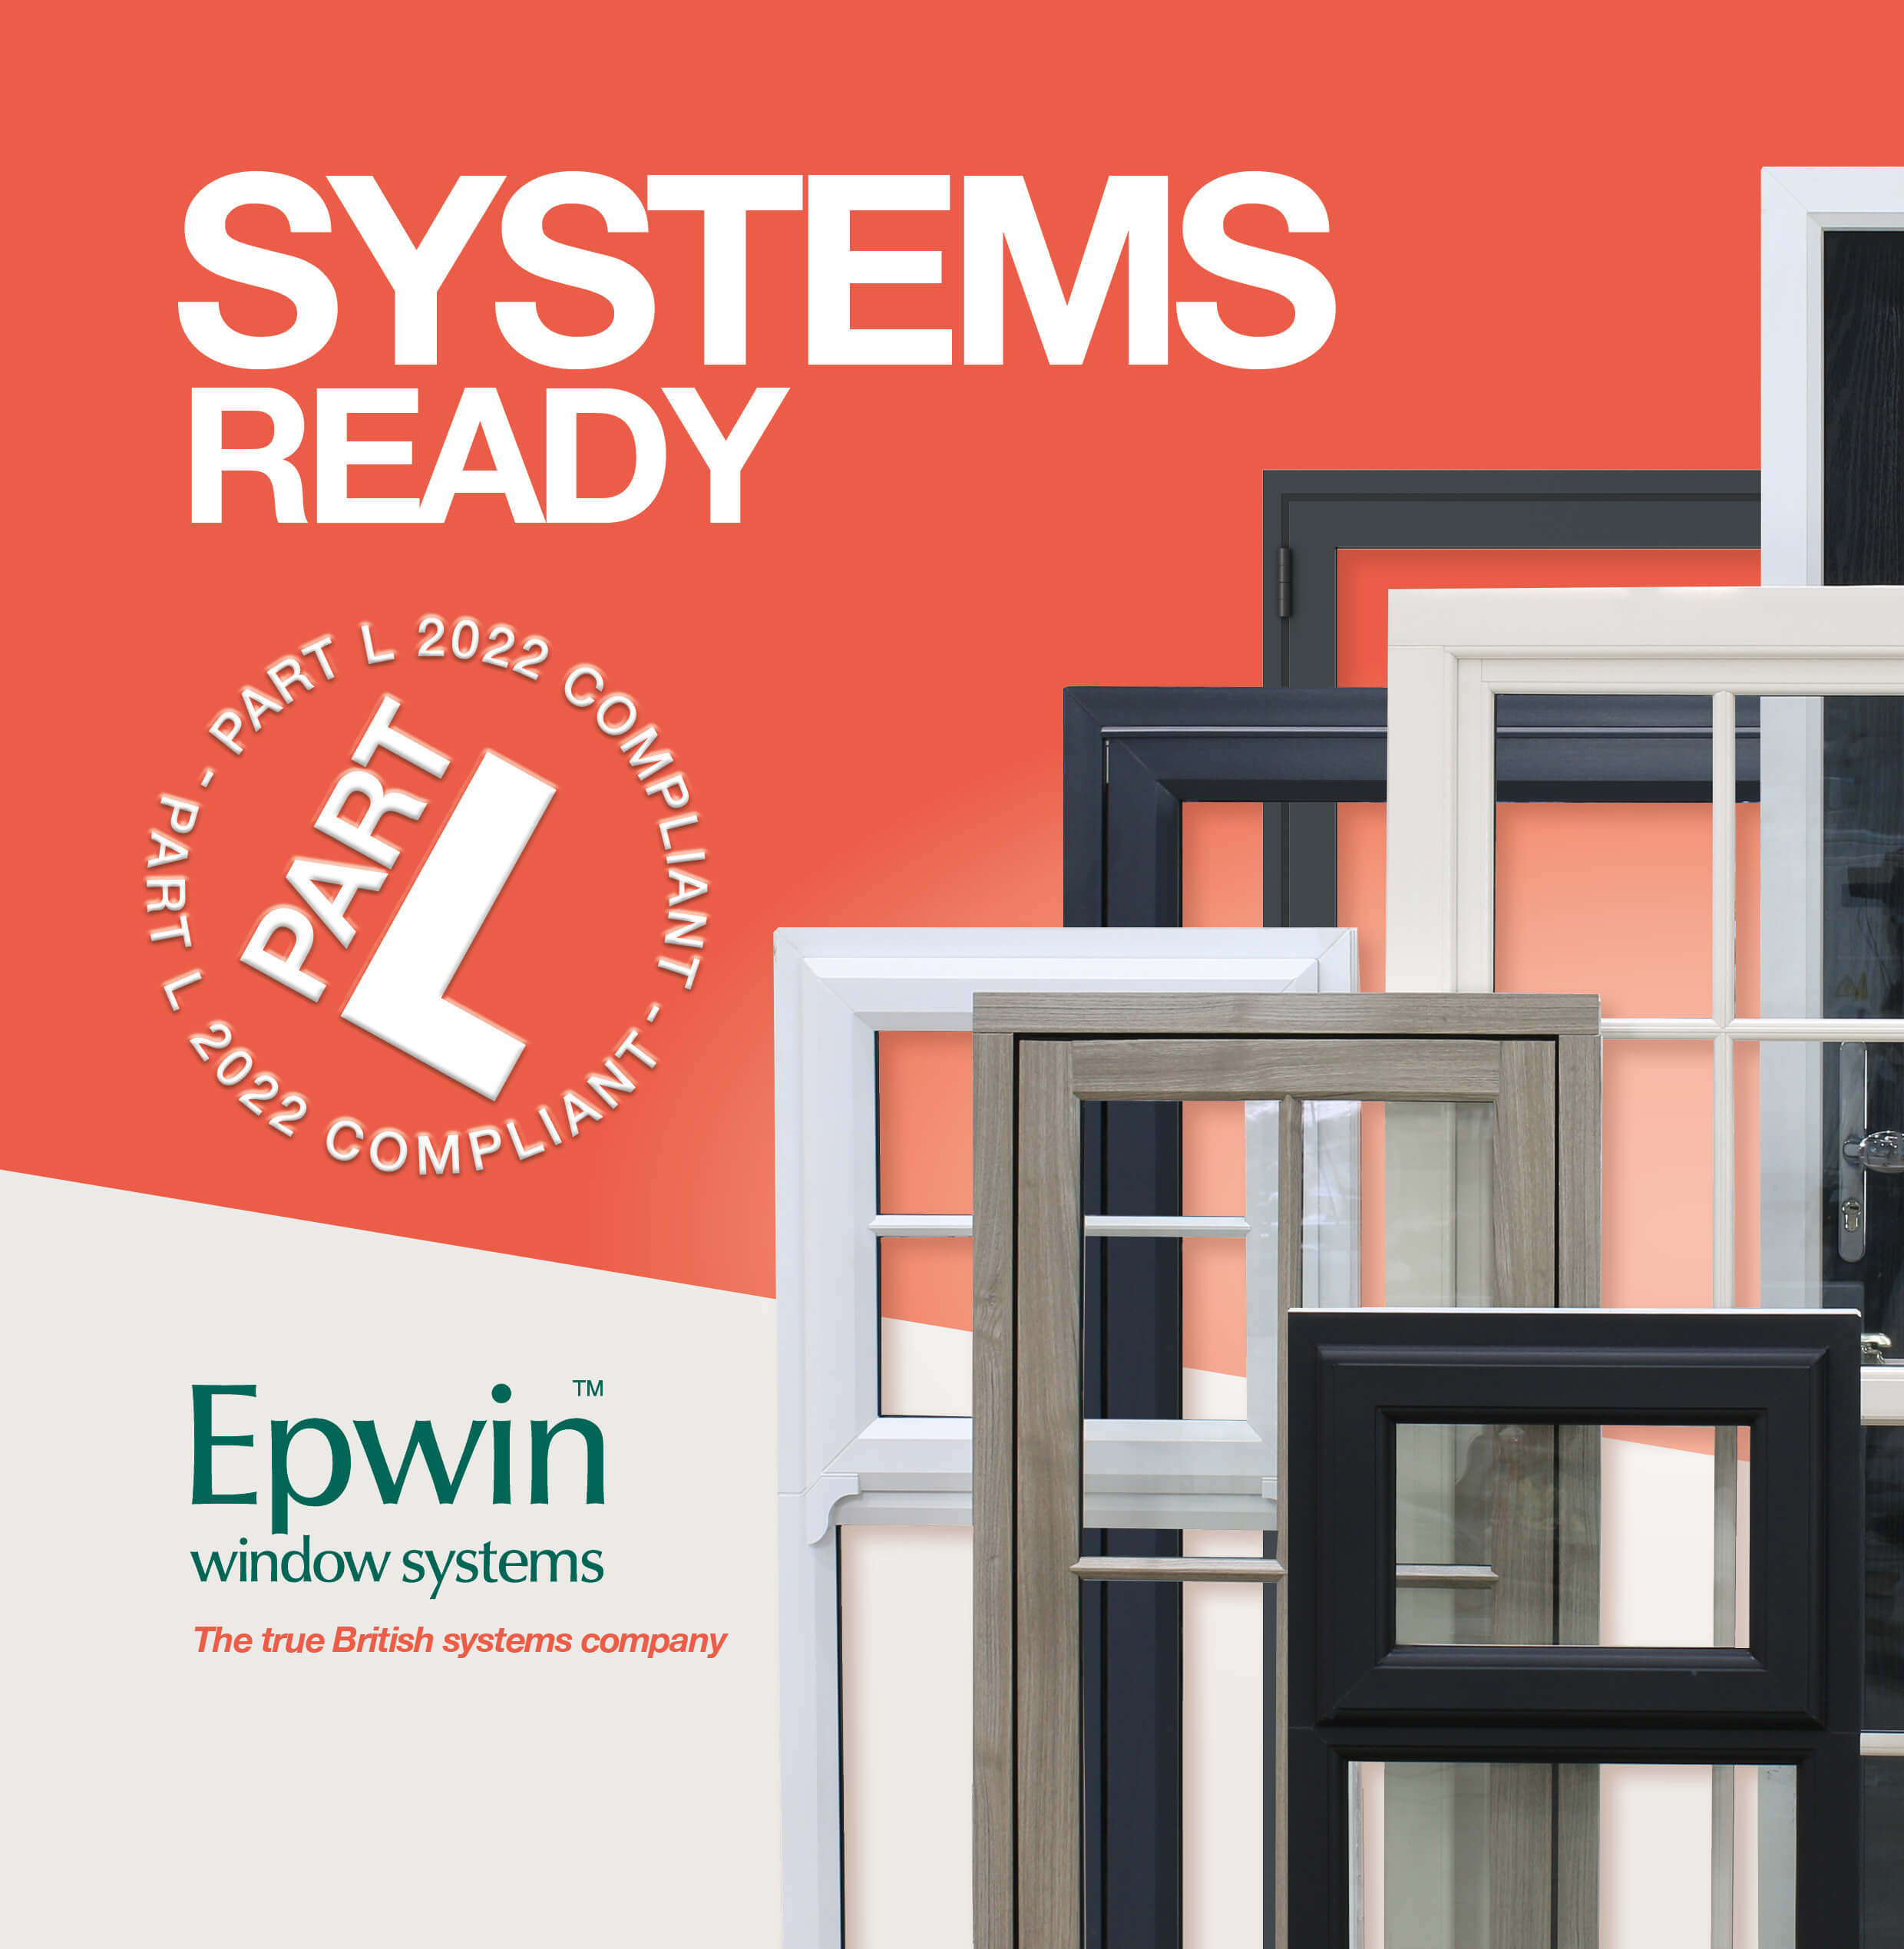 Systems ready for new Part L requirements for Epwin Window Systems